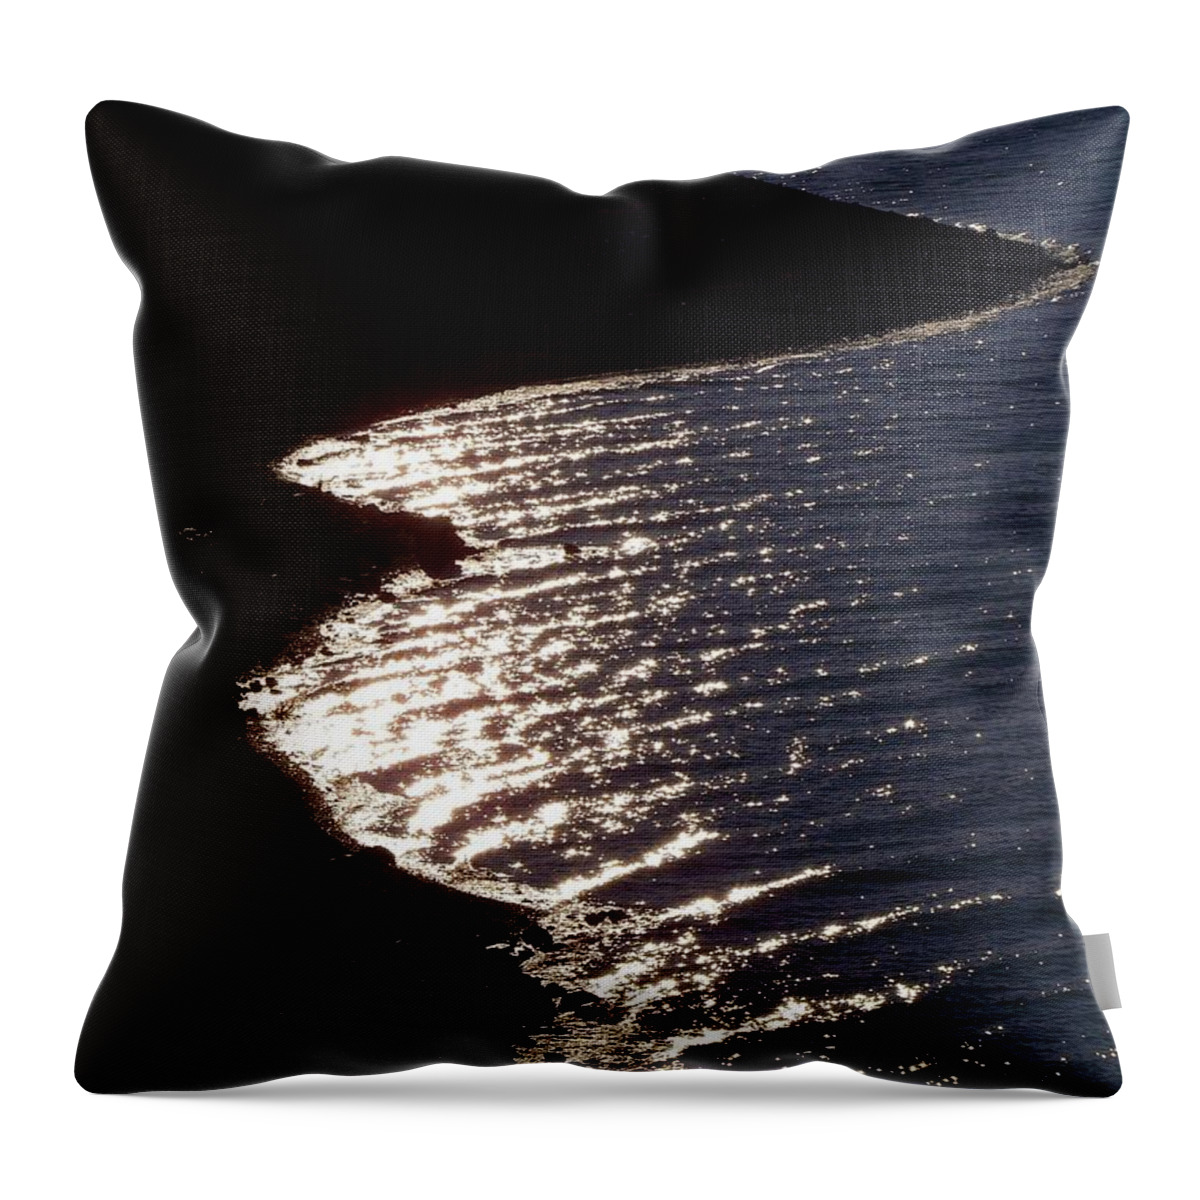 Water Throw Pillow featuring the photograph Shining Shoreline by Dorrene BrownButterfield